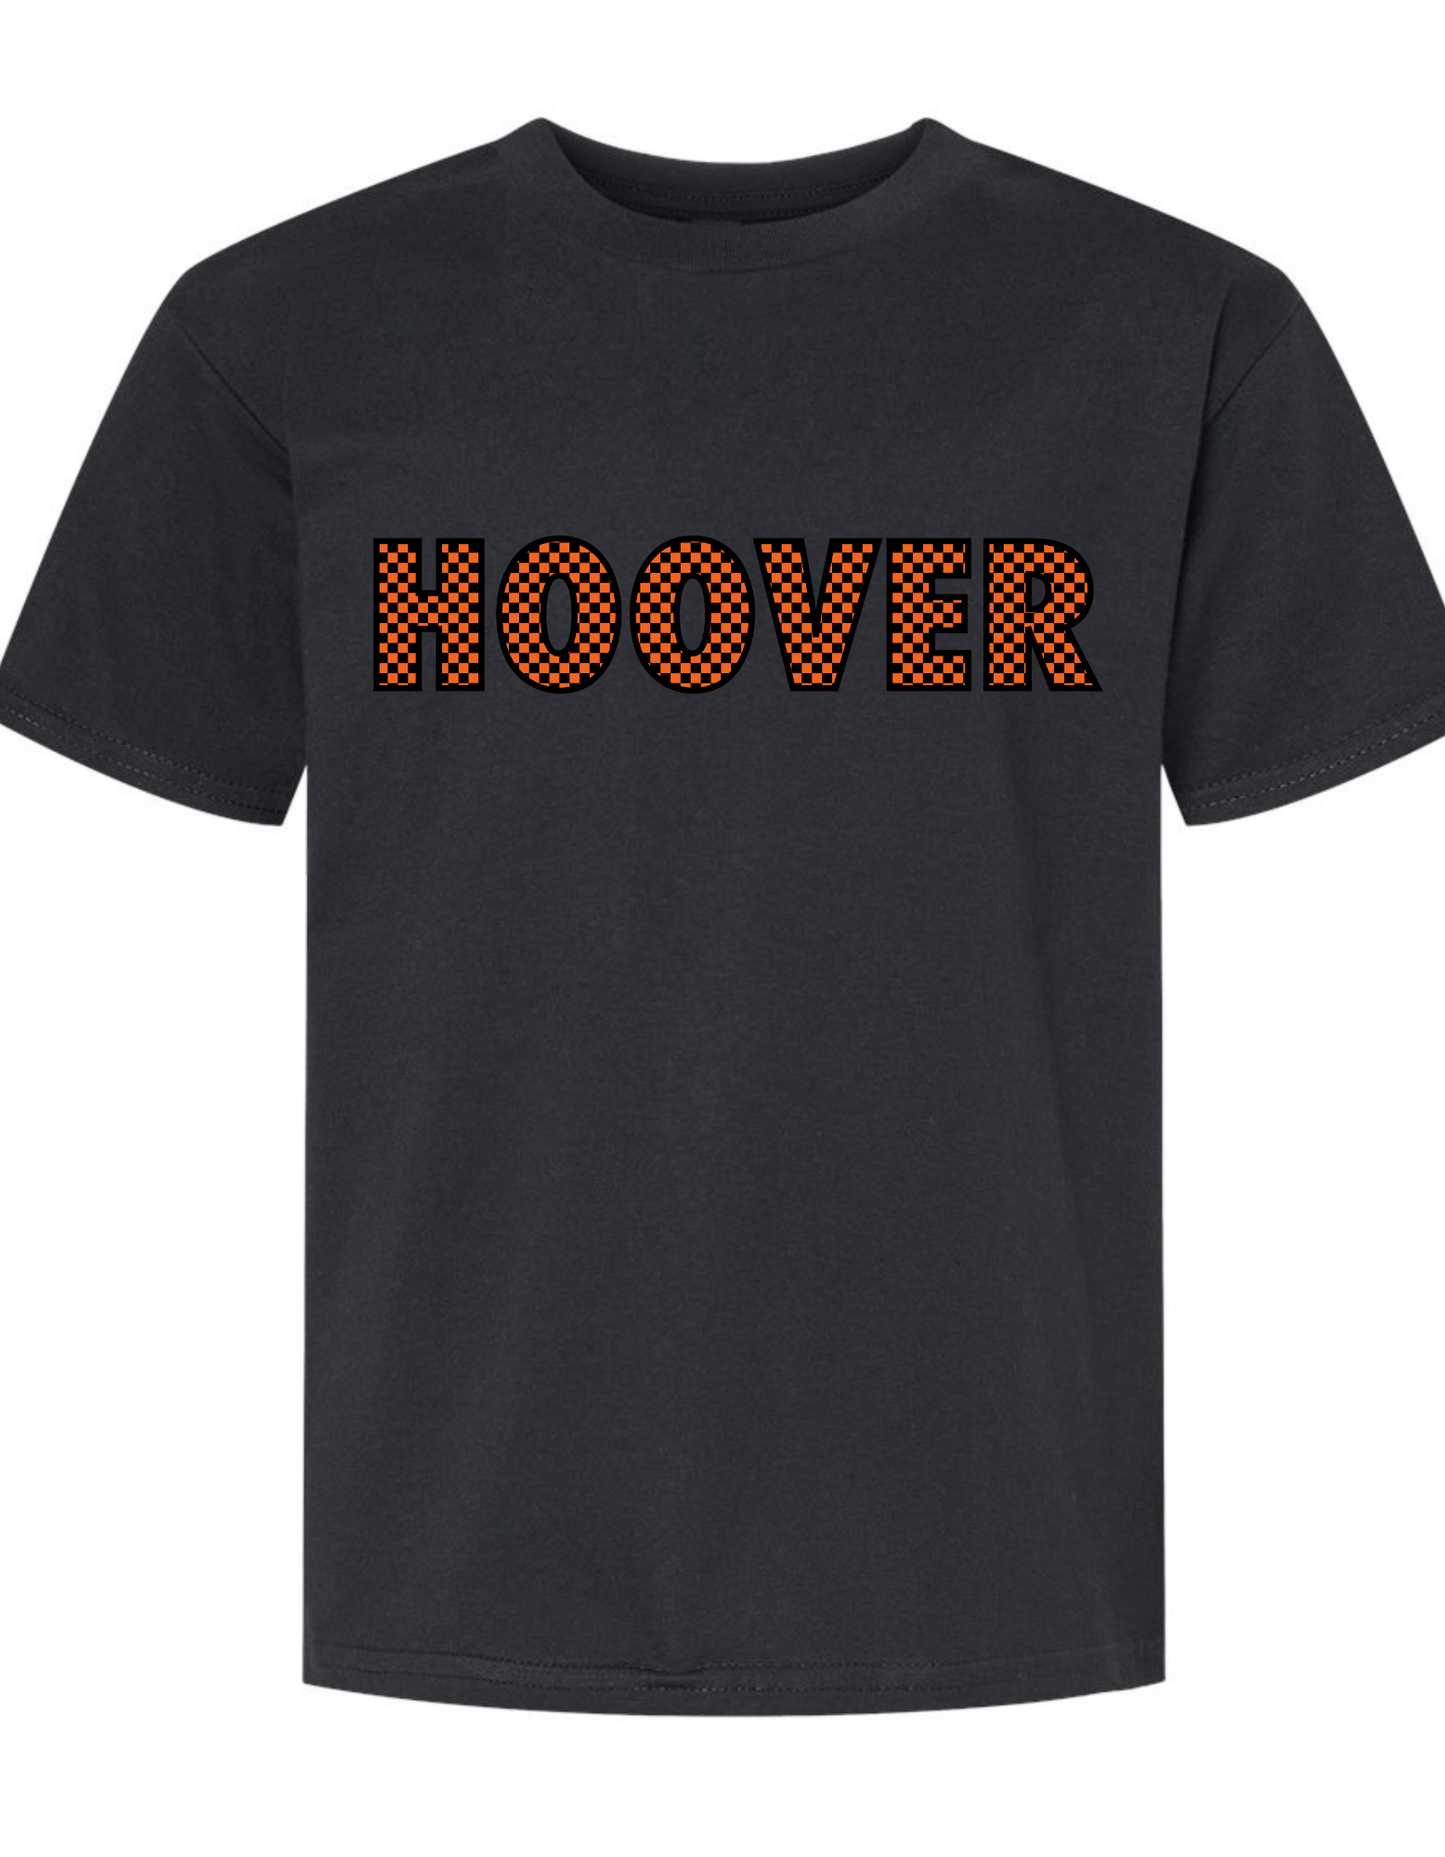 Check it out Hoover